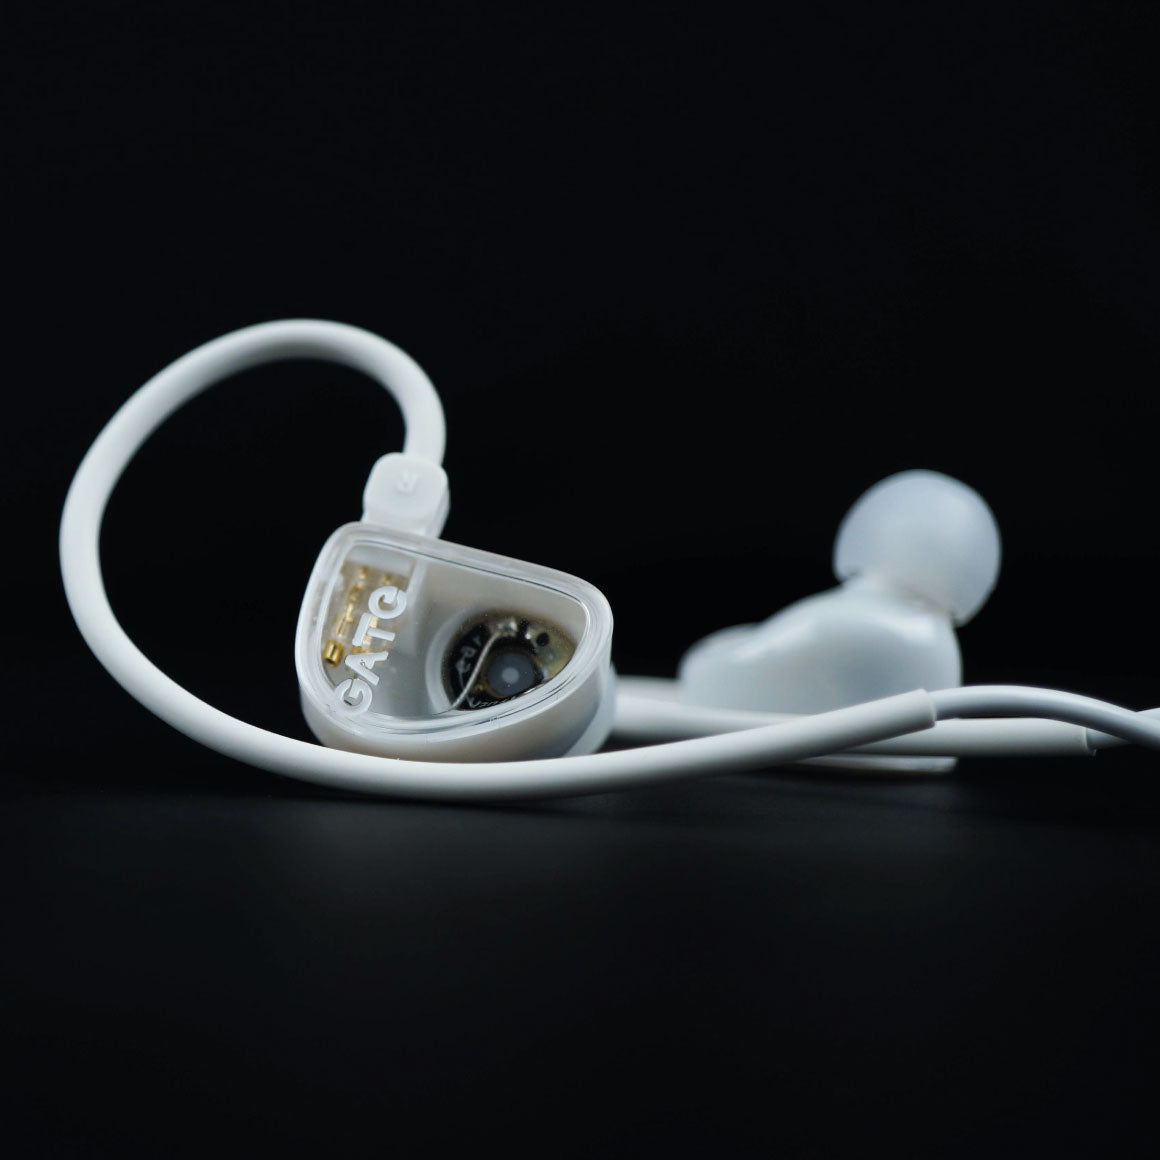 Headphone-Zone-Truthear-GATe-White-Without-Mic